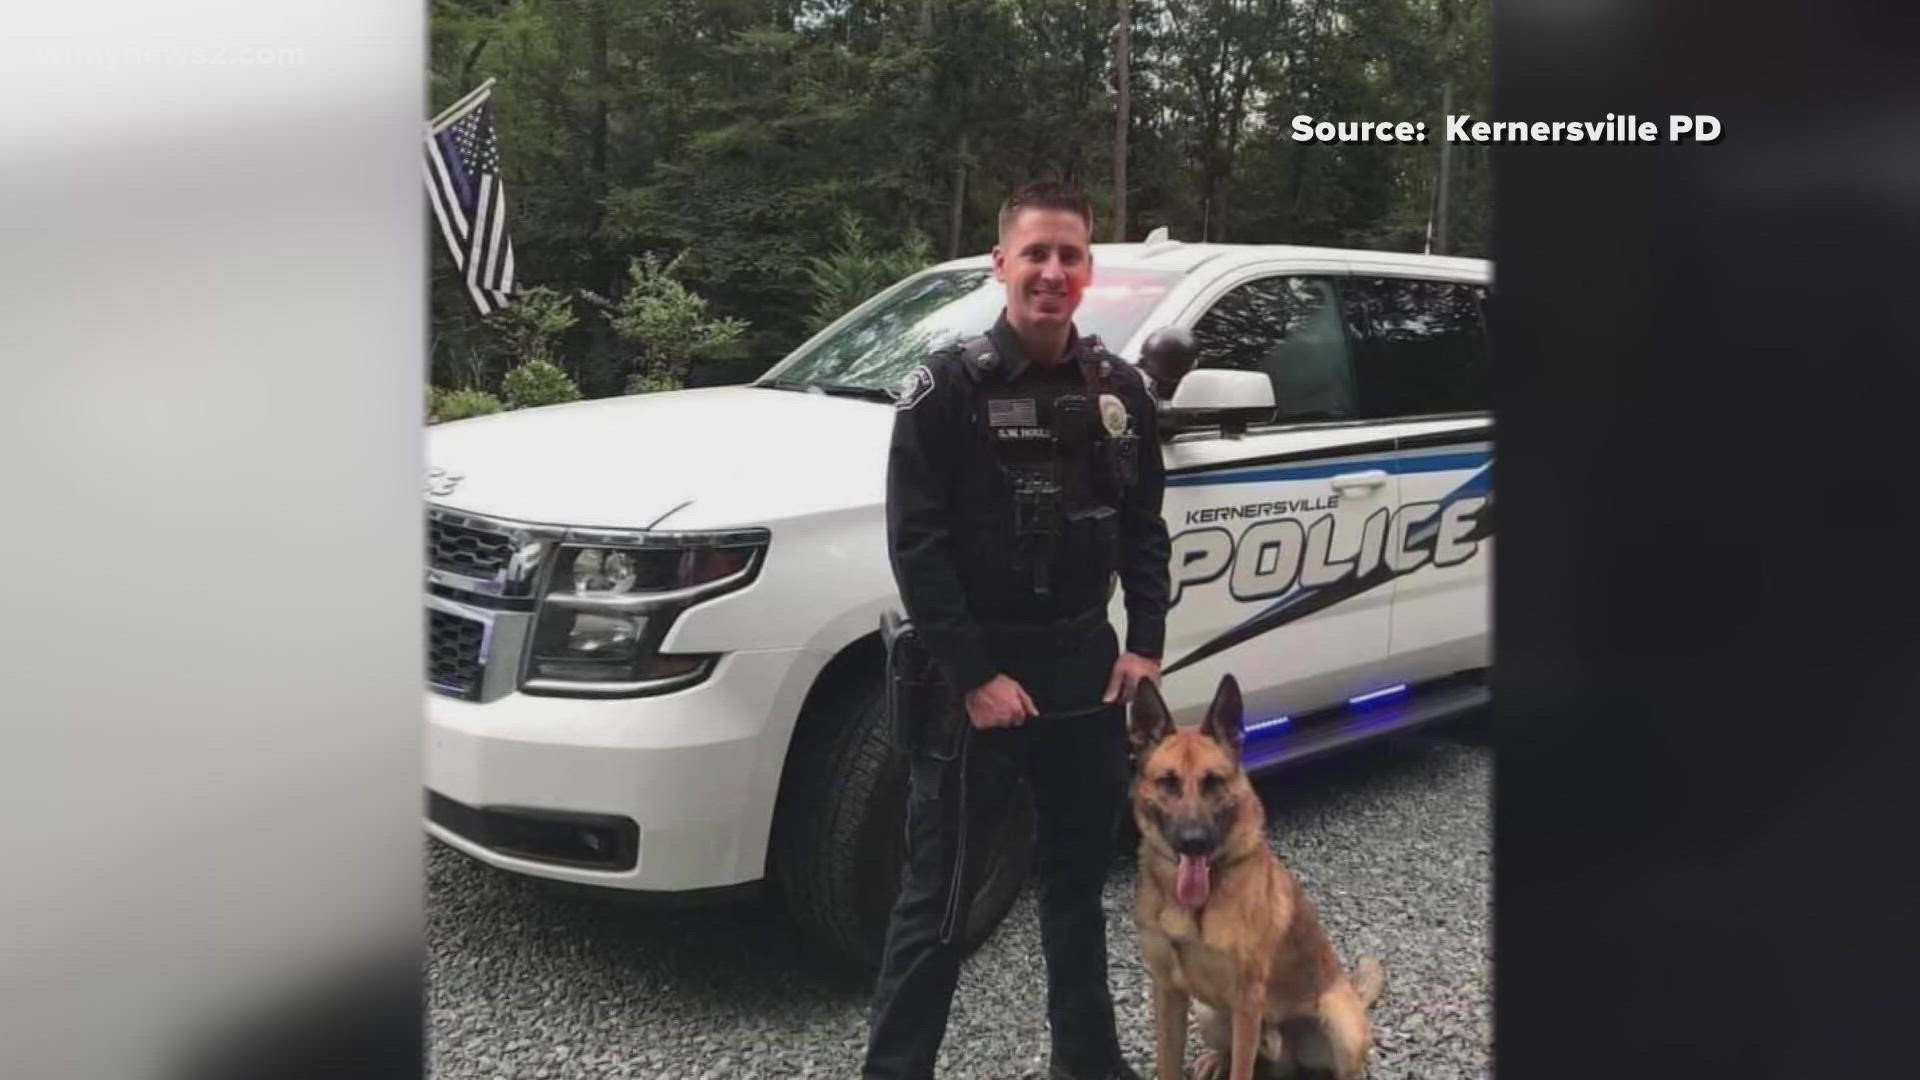 Officer Sean Houle was shot in the line of duty months ago. Though his career as a police officer will come to an end, he said he has a new calling.